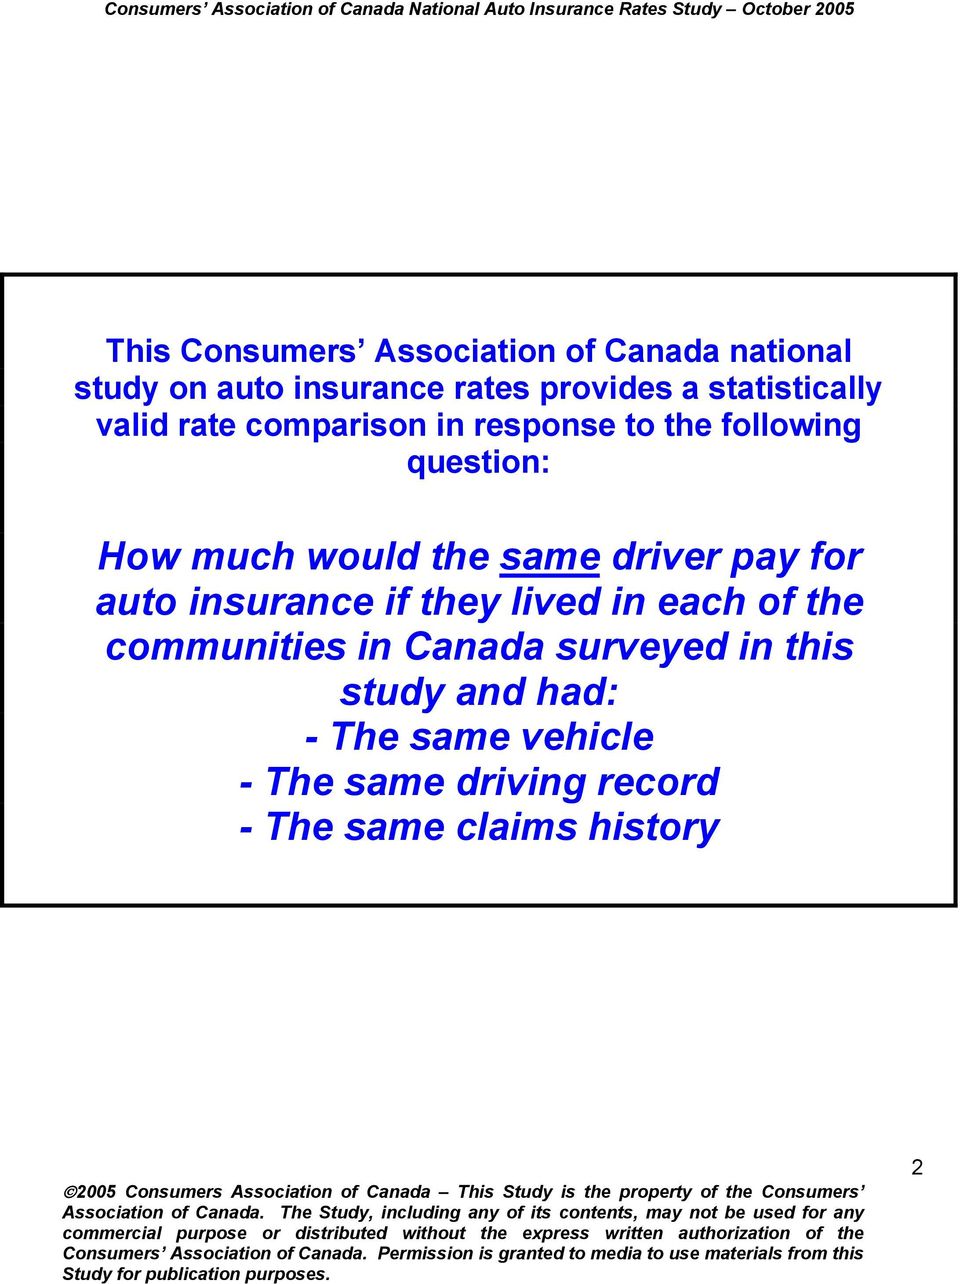 the same driver pay for auto insurance if they lived in each of the communities in Canada